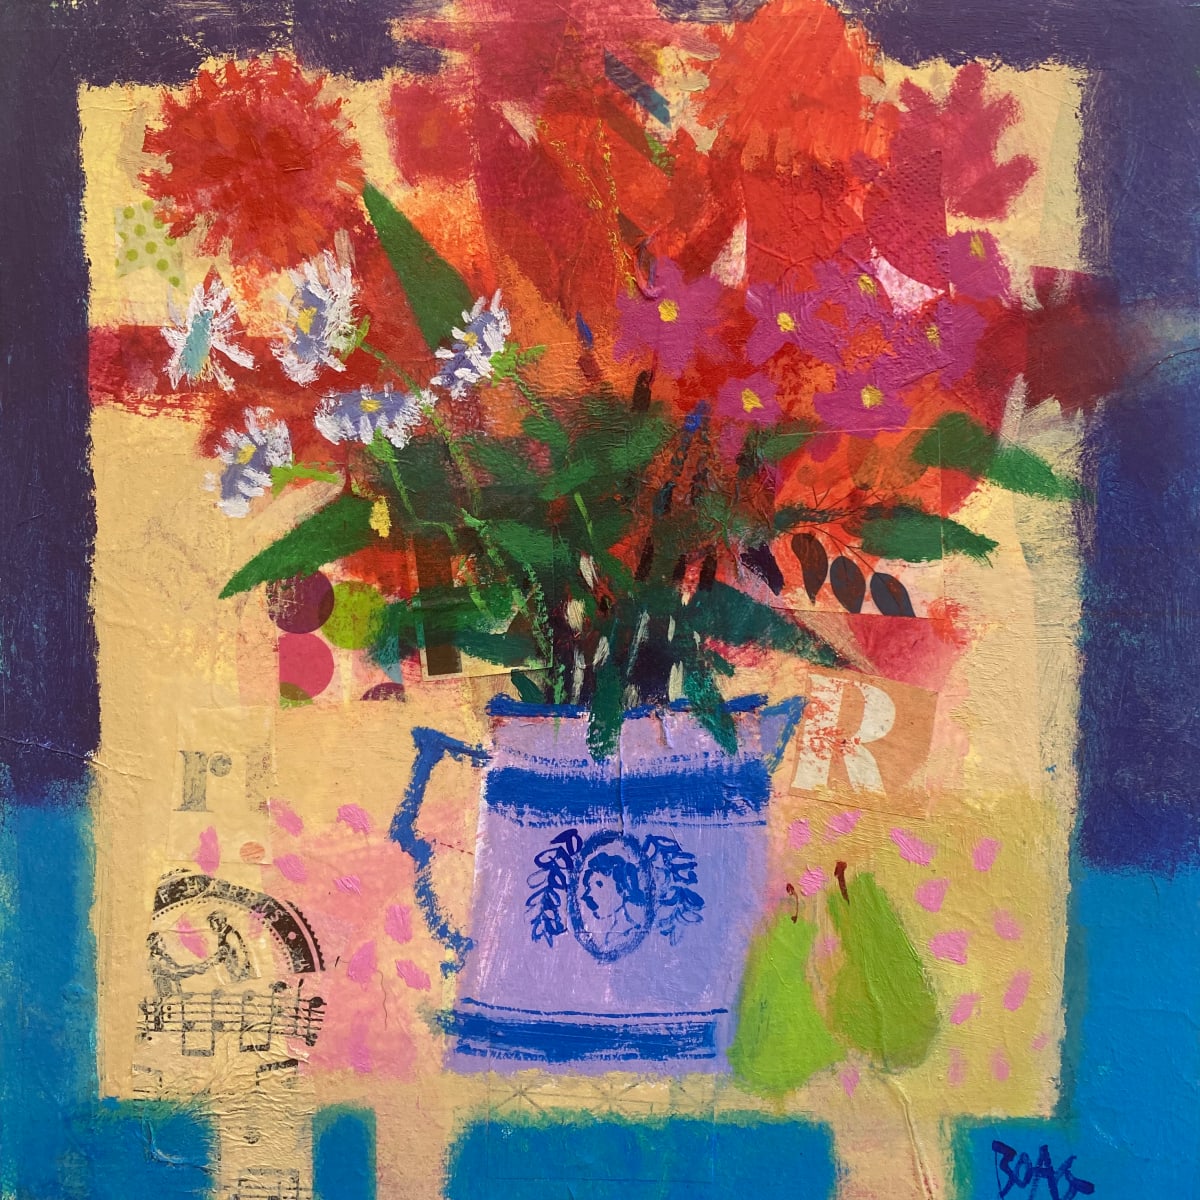 The Blue Vase by francis boag 